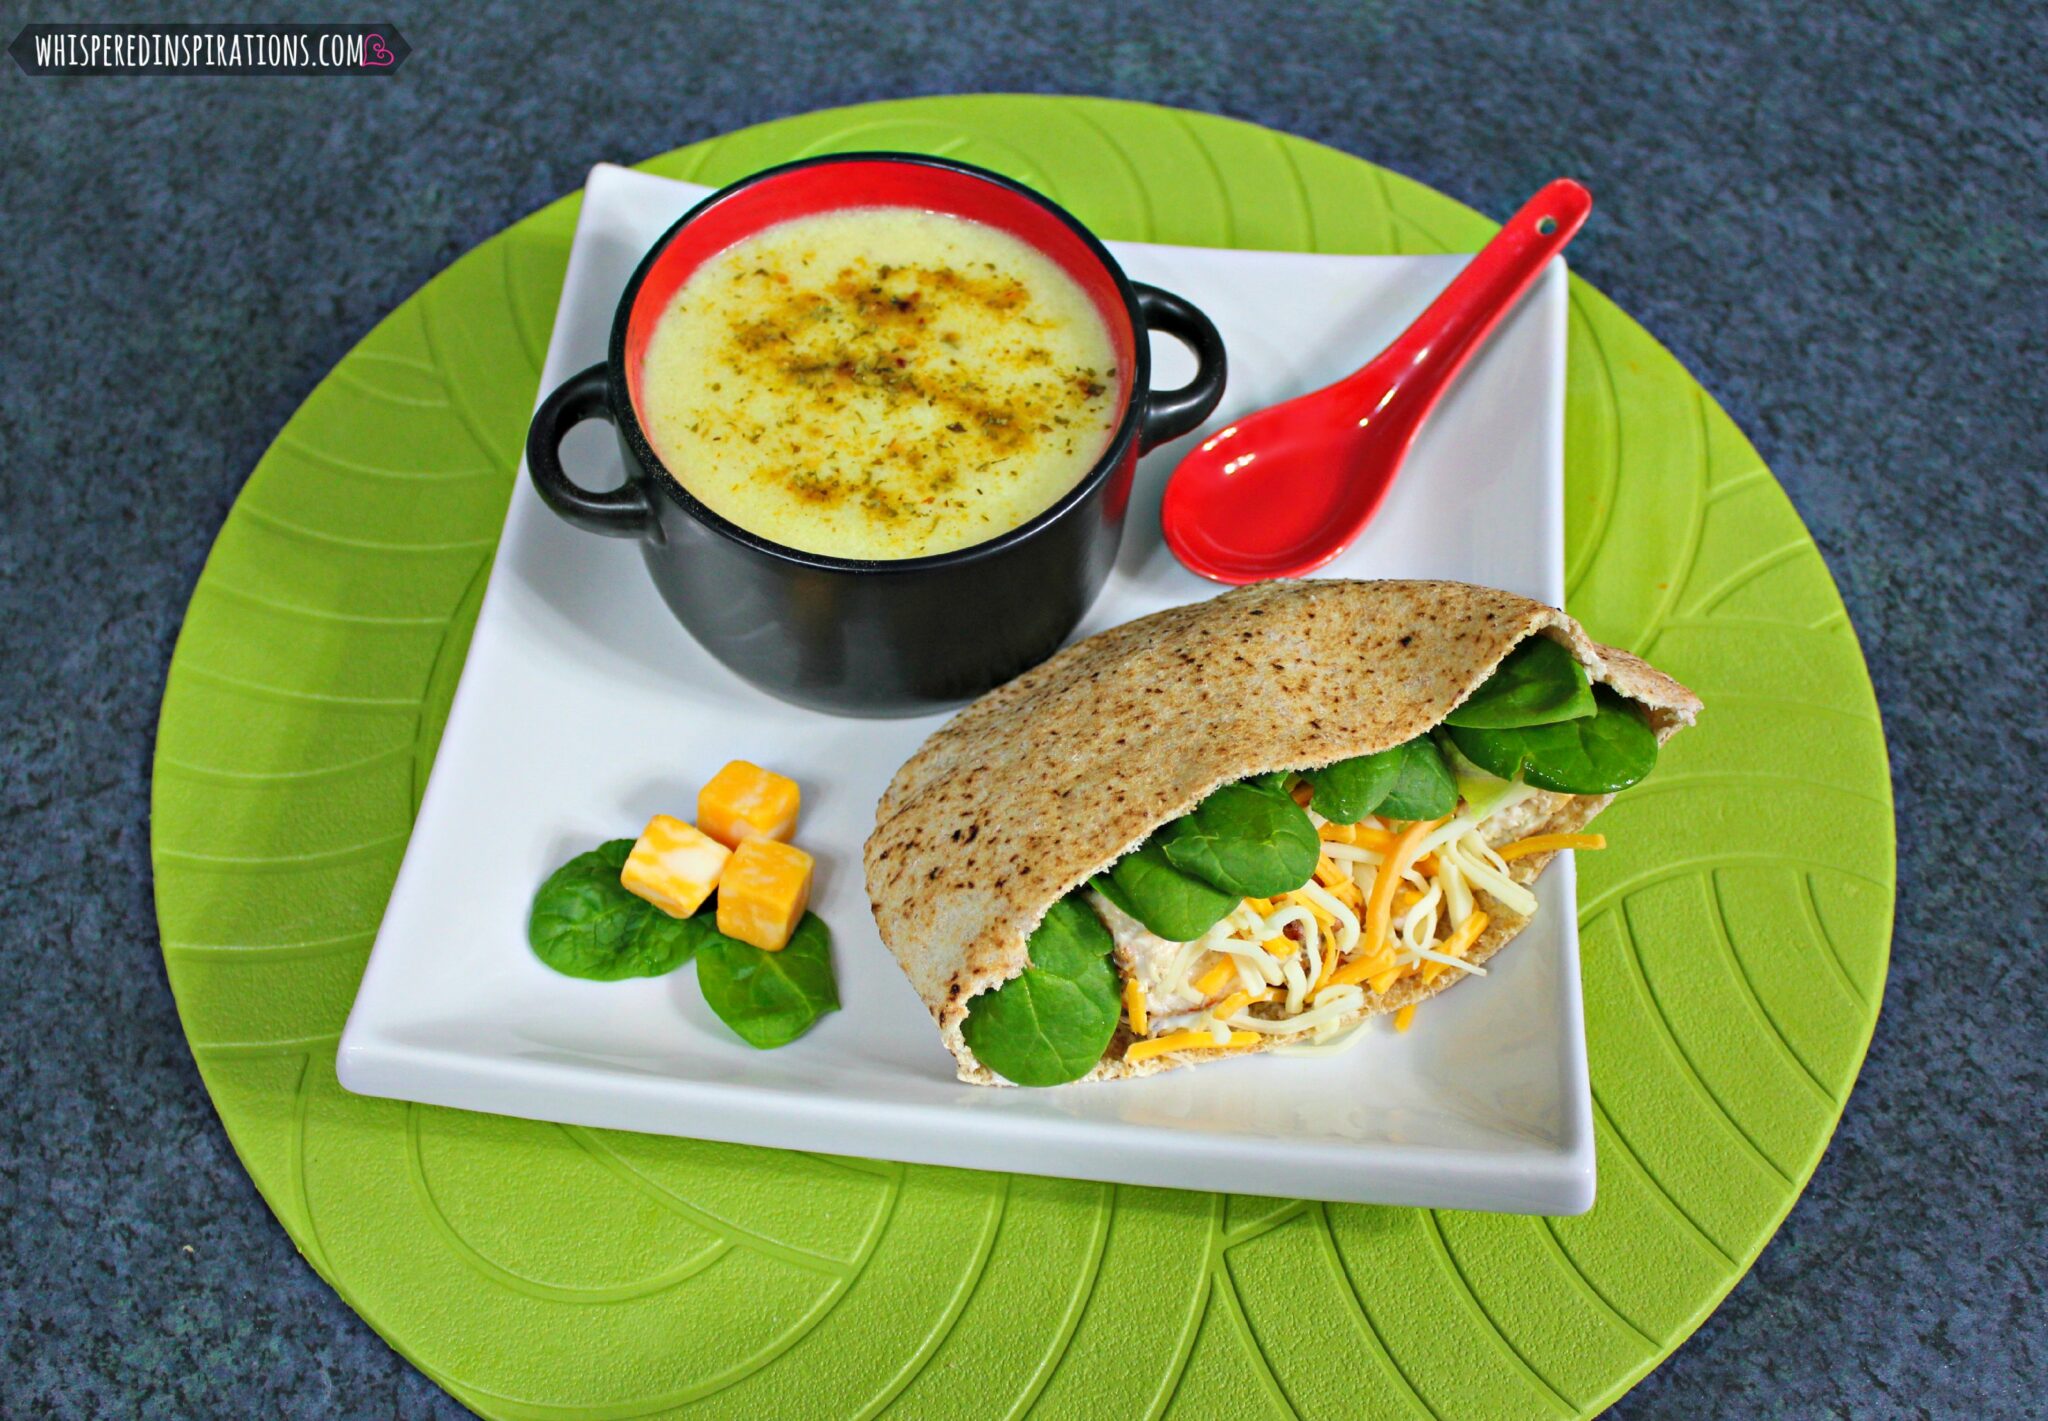 Chicken salad pita and potato soup are shown on a plate. 